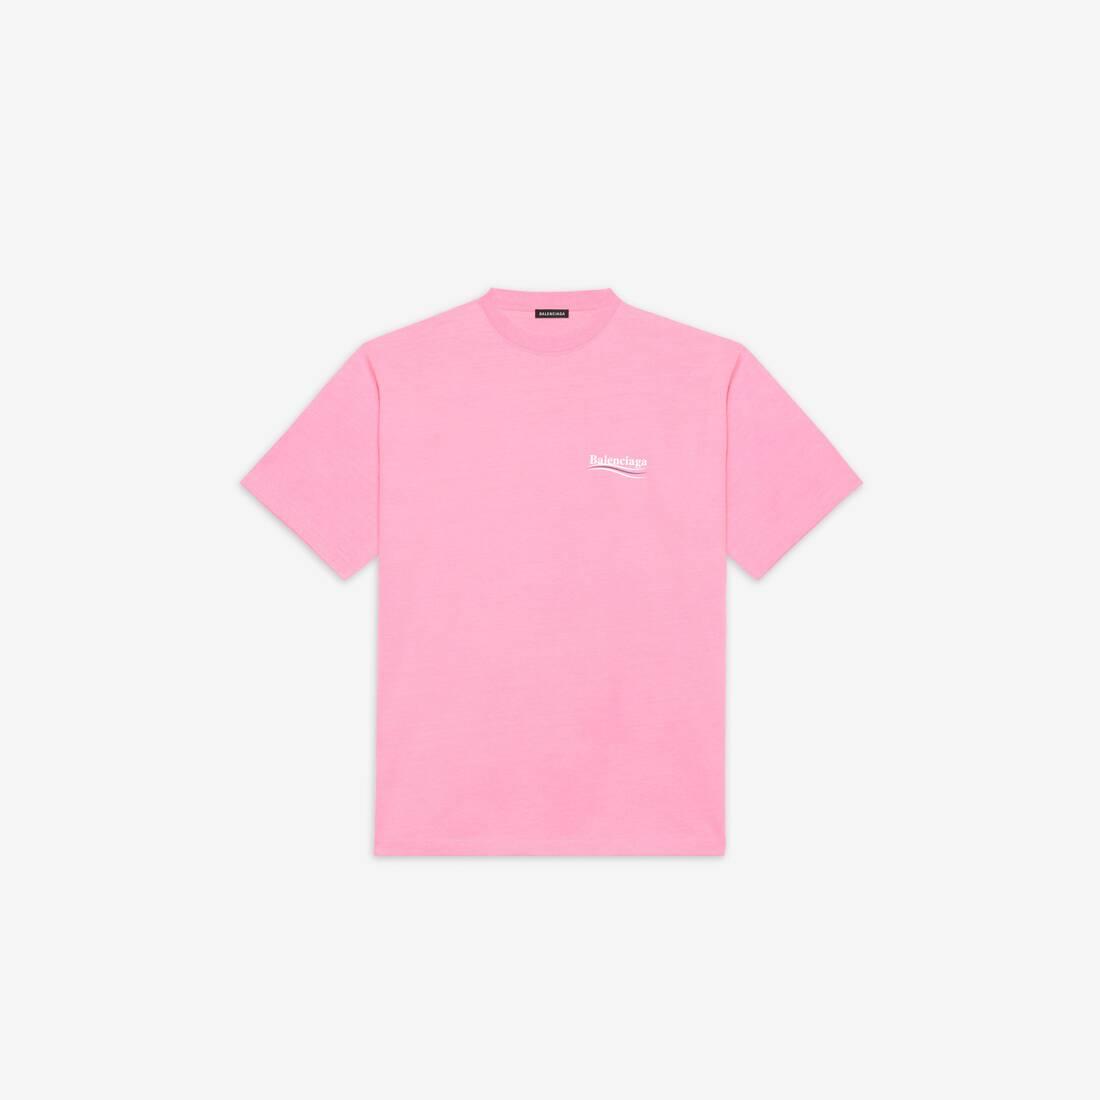 Balenciaga Large Fit T-shirt Pink for Men - Lyst